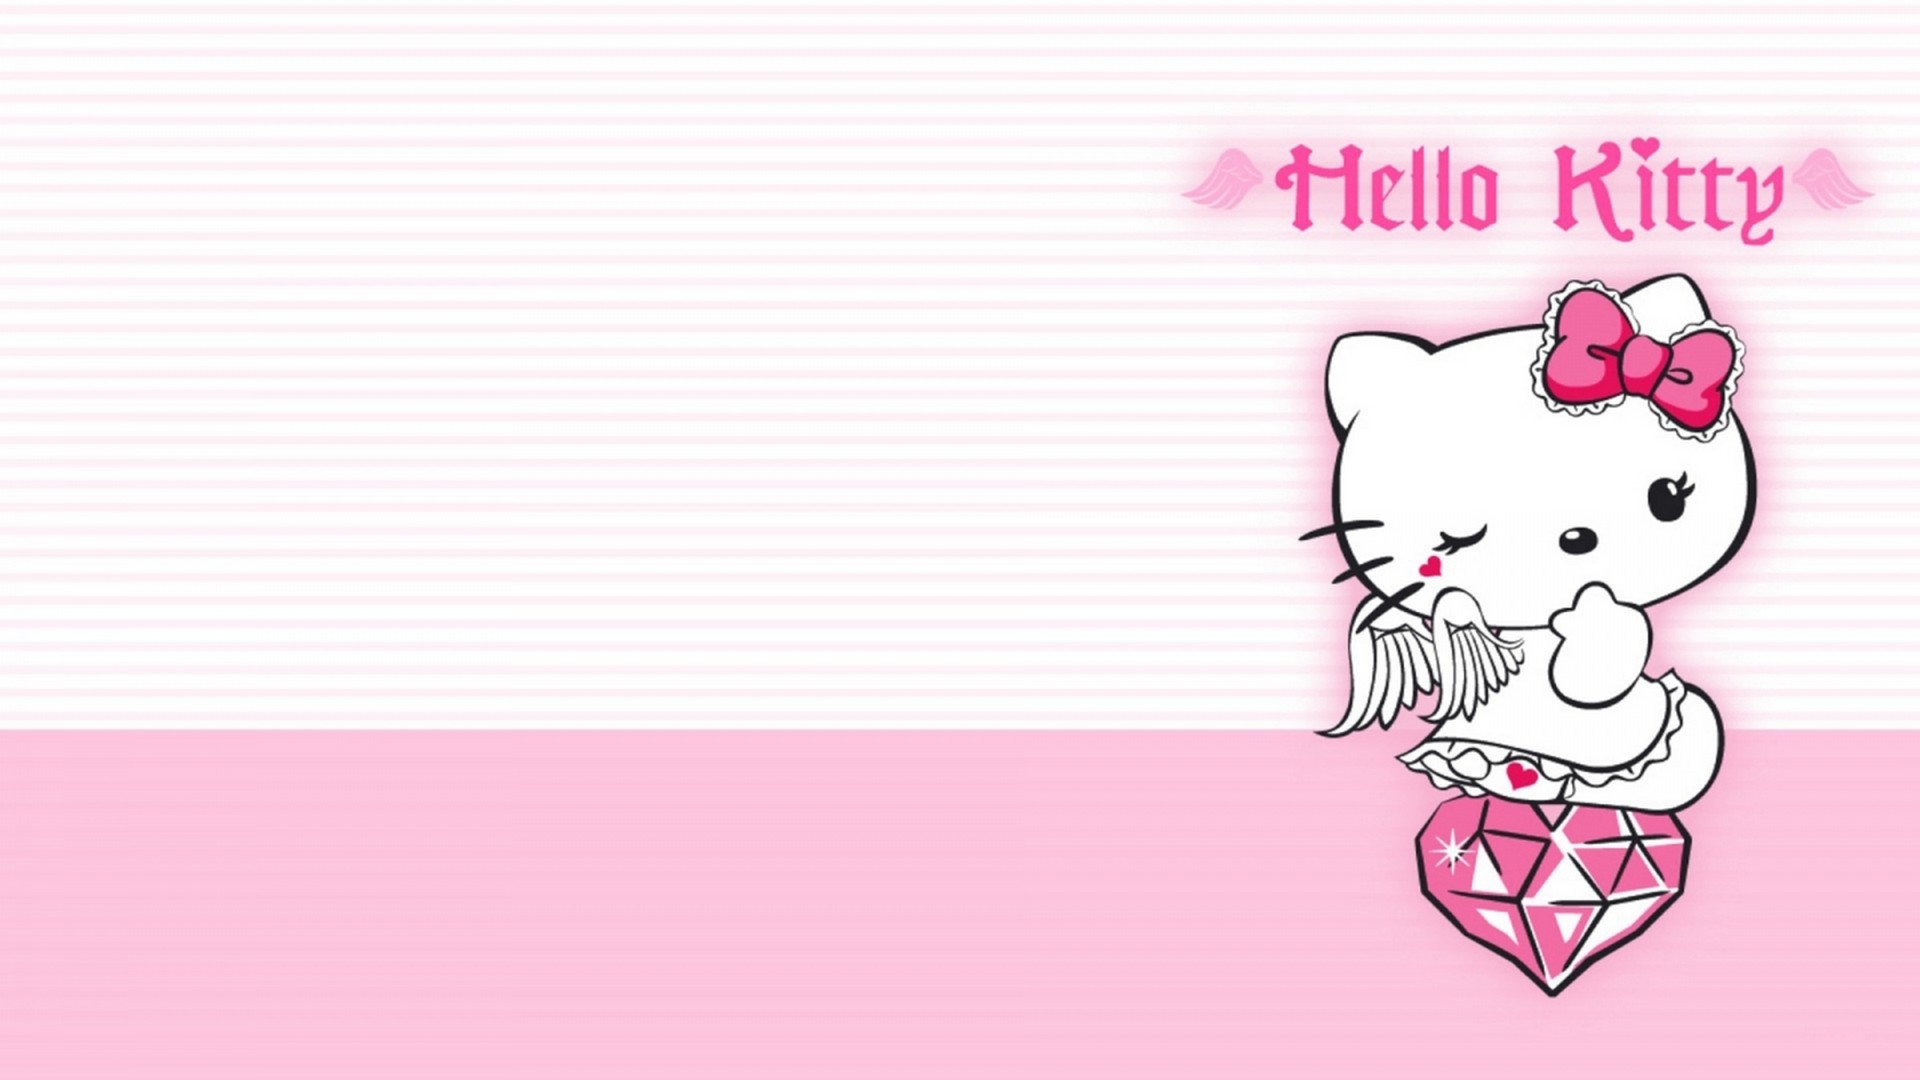 Wallpaper HD Hello Kitty Characters with image resolution 1920x1080 pixel. You can make this wallpaper for your Desktop Computer Backgrounds, Mac Wallpapers, Android Lock screen or iPhone Screensavers